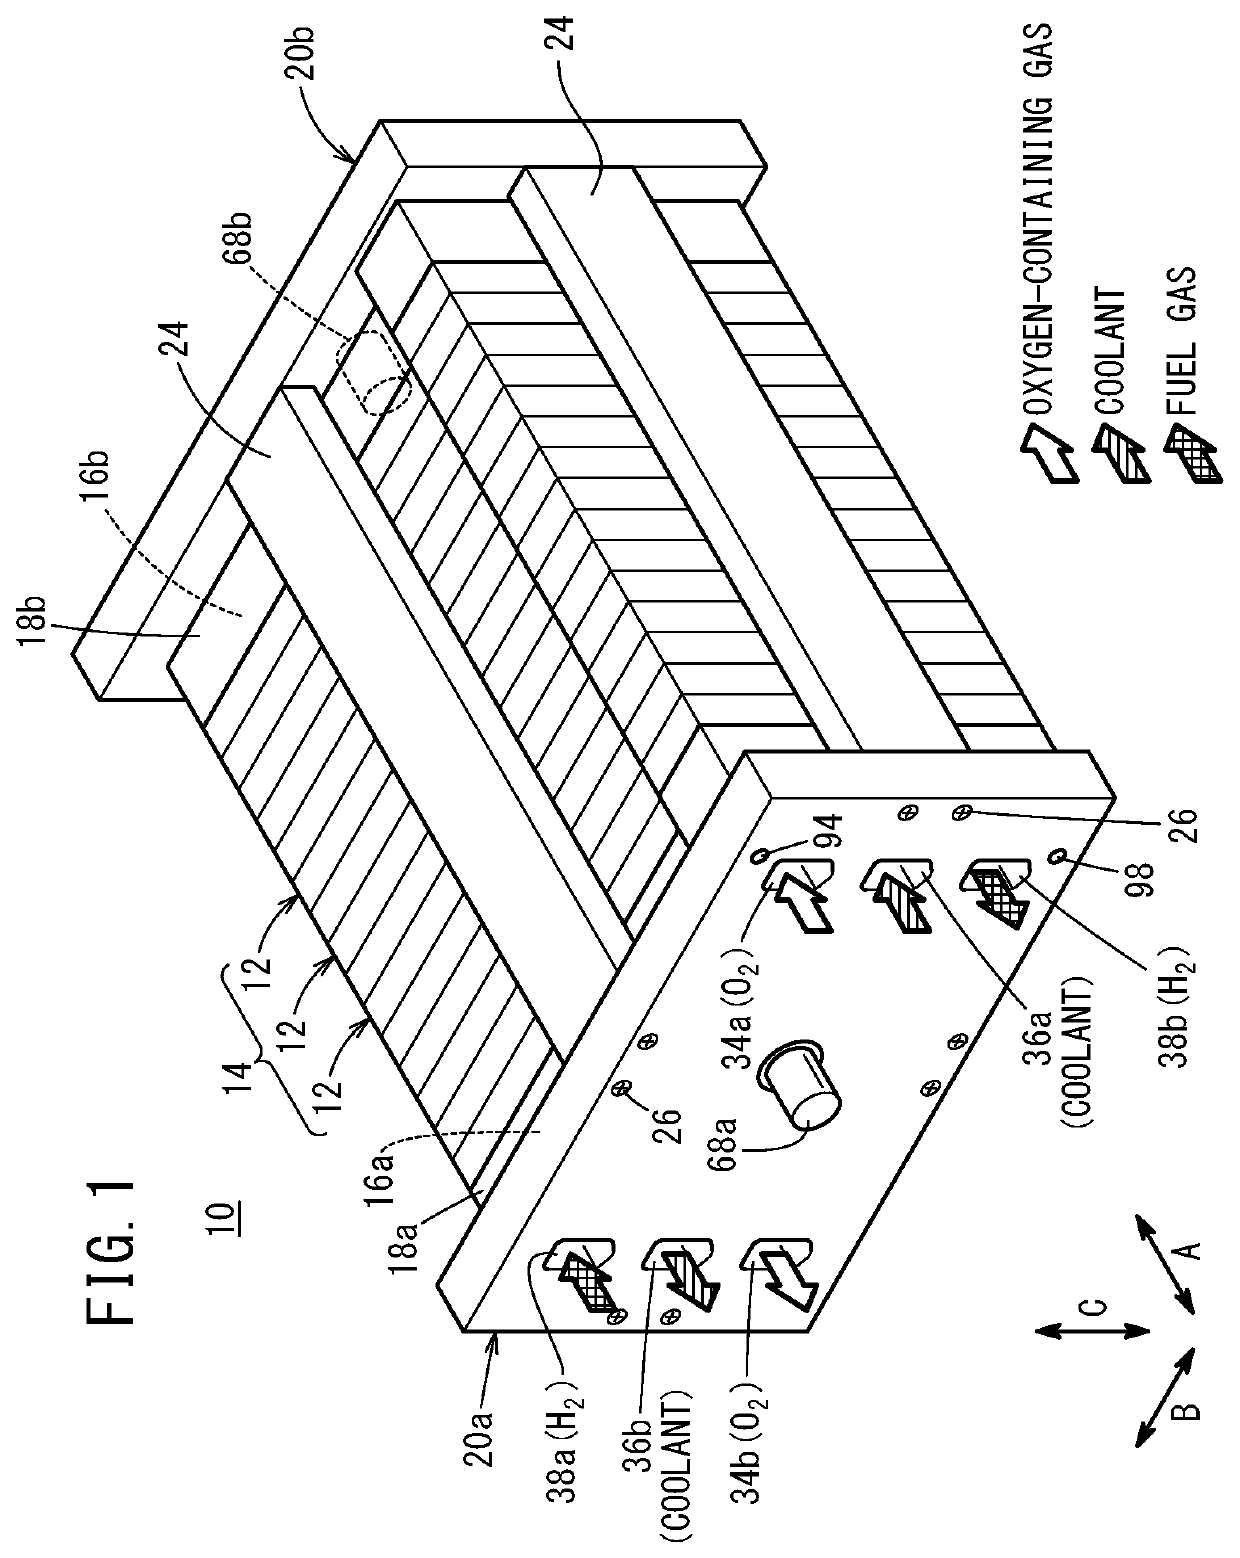 Fuel cell separator and fuel cell stack